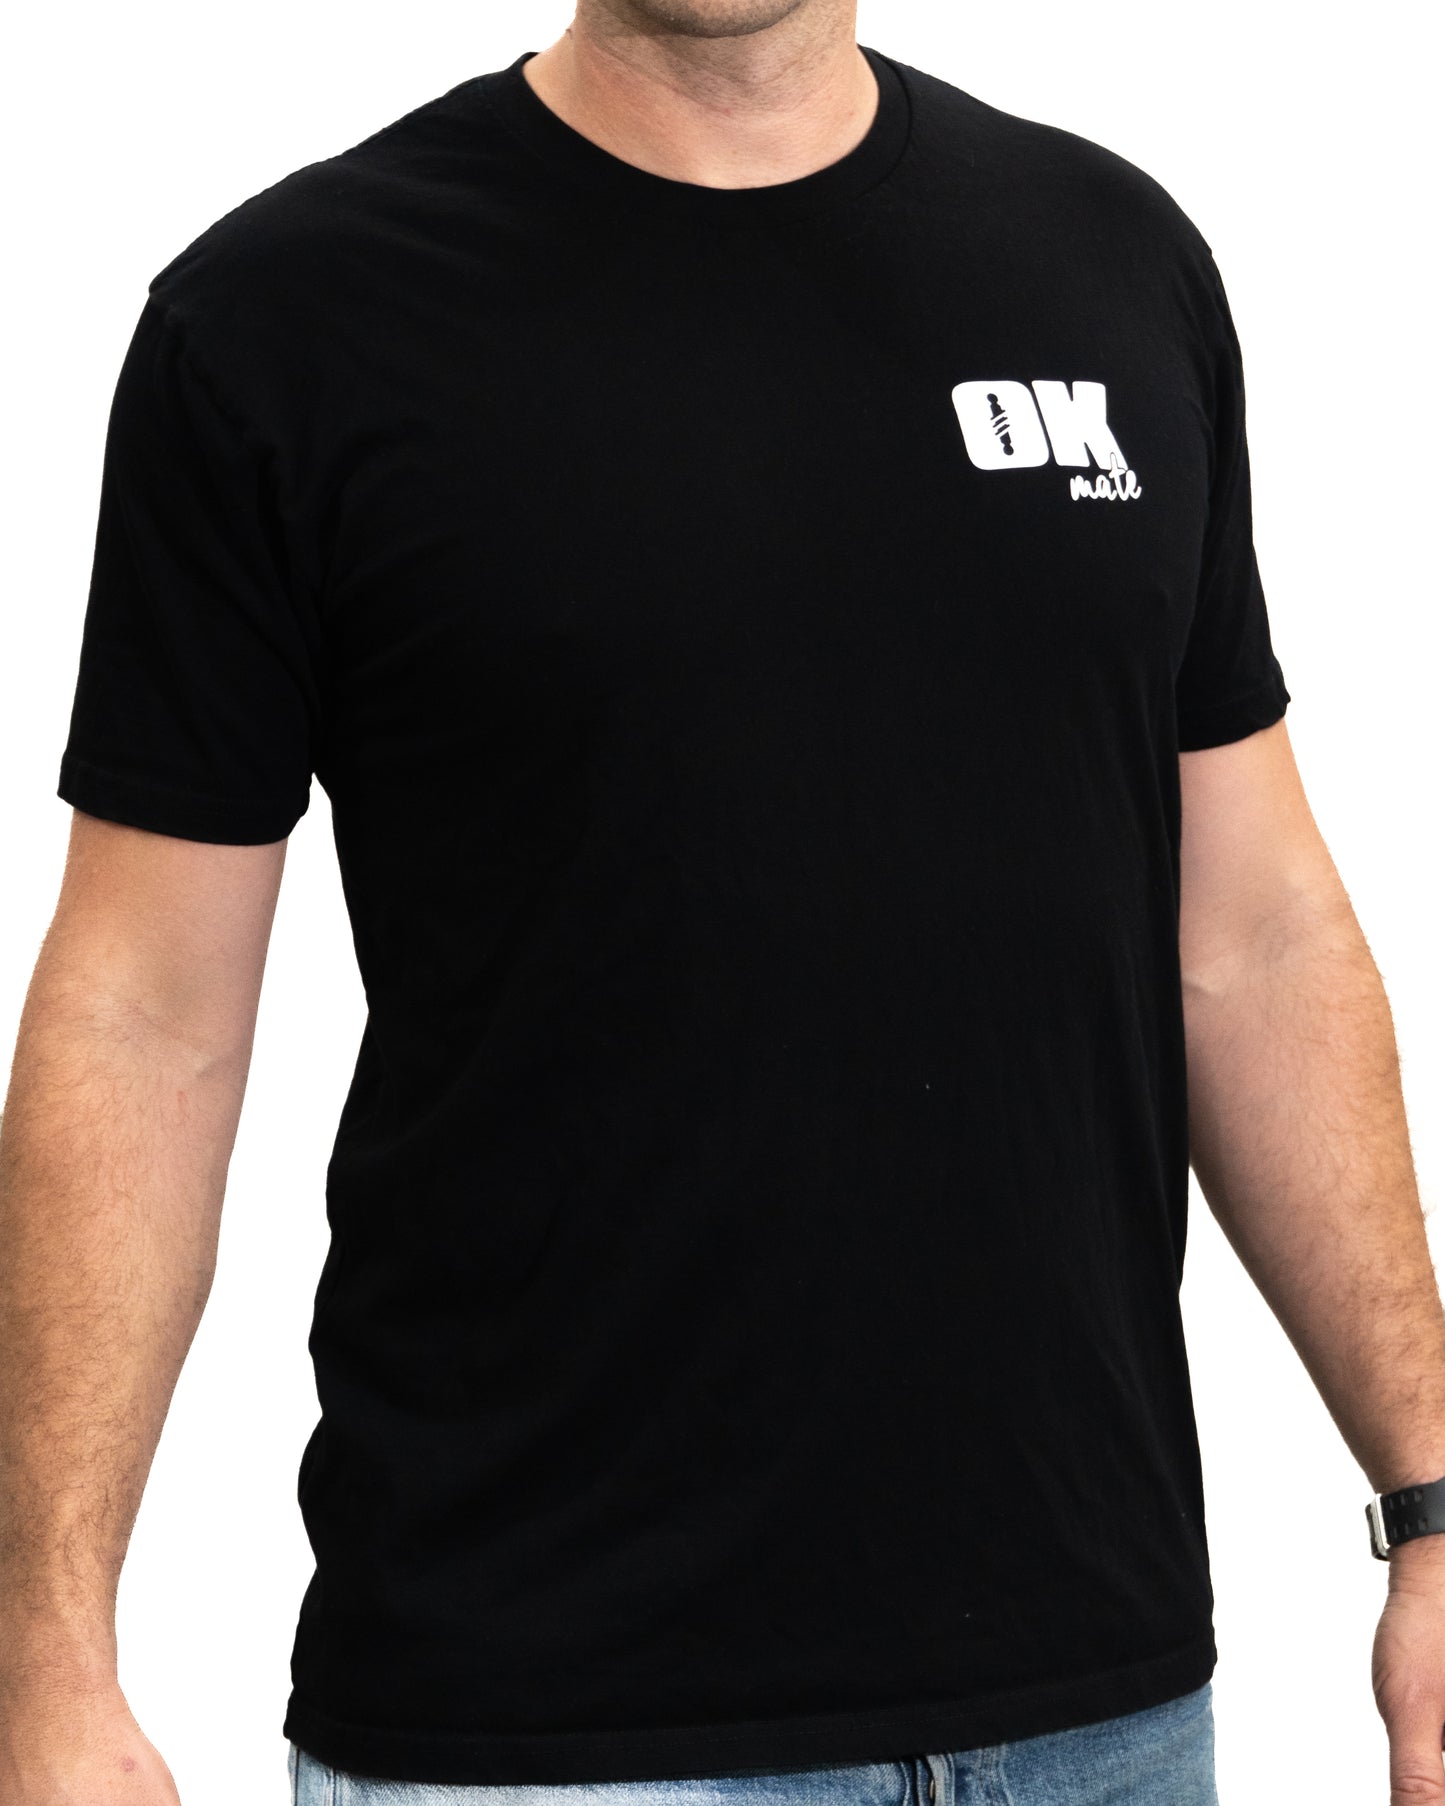 Outback Kitters "OK MATE" Logo Tee - Outback Kitters